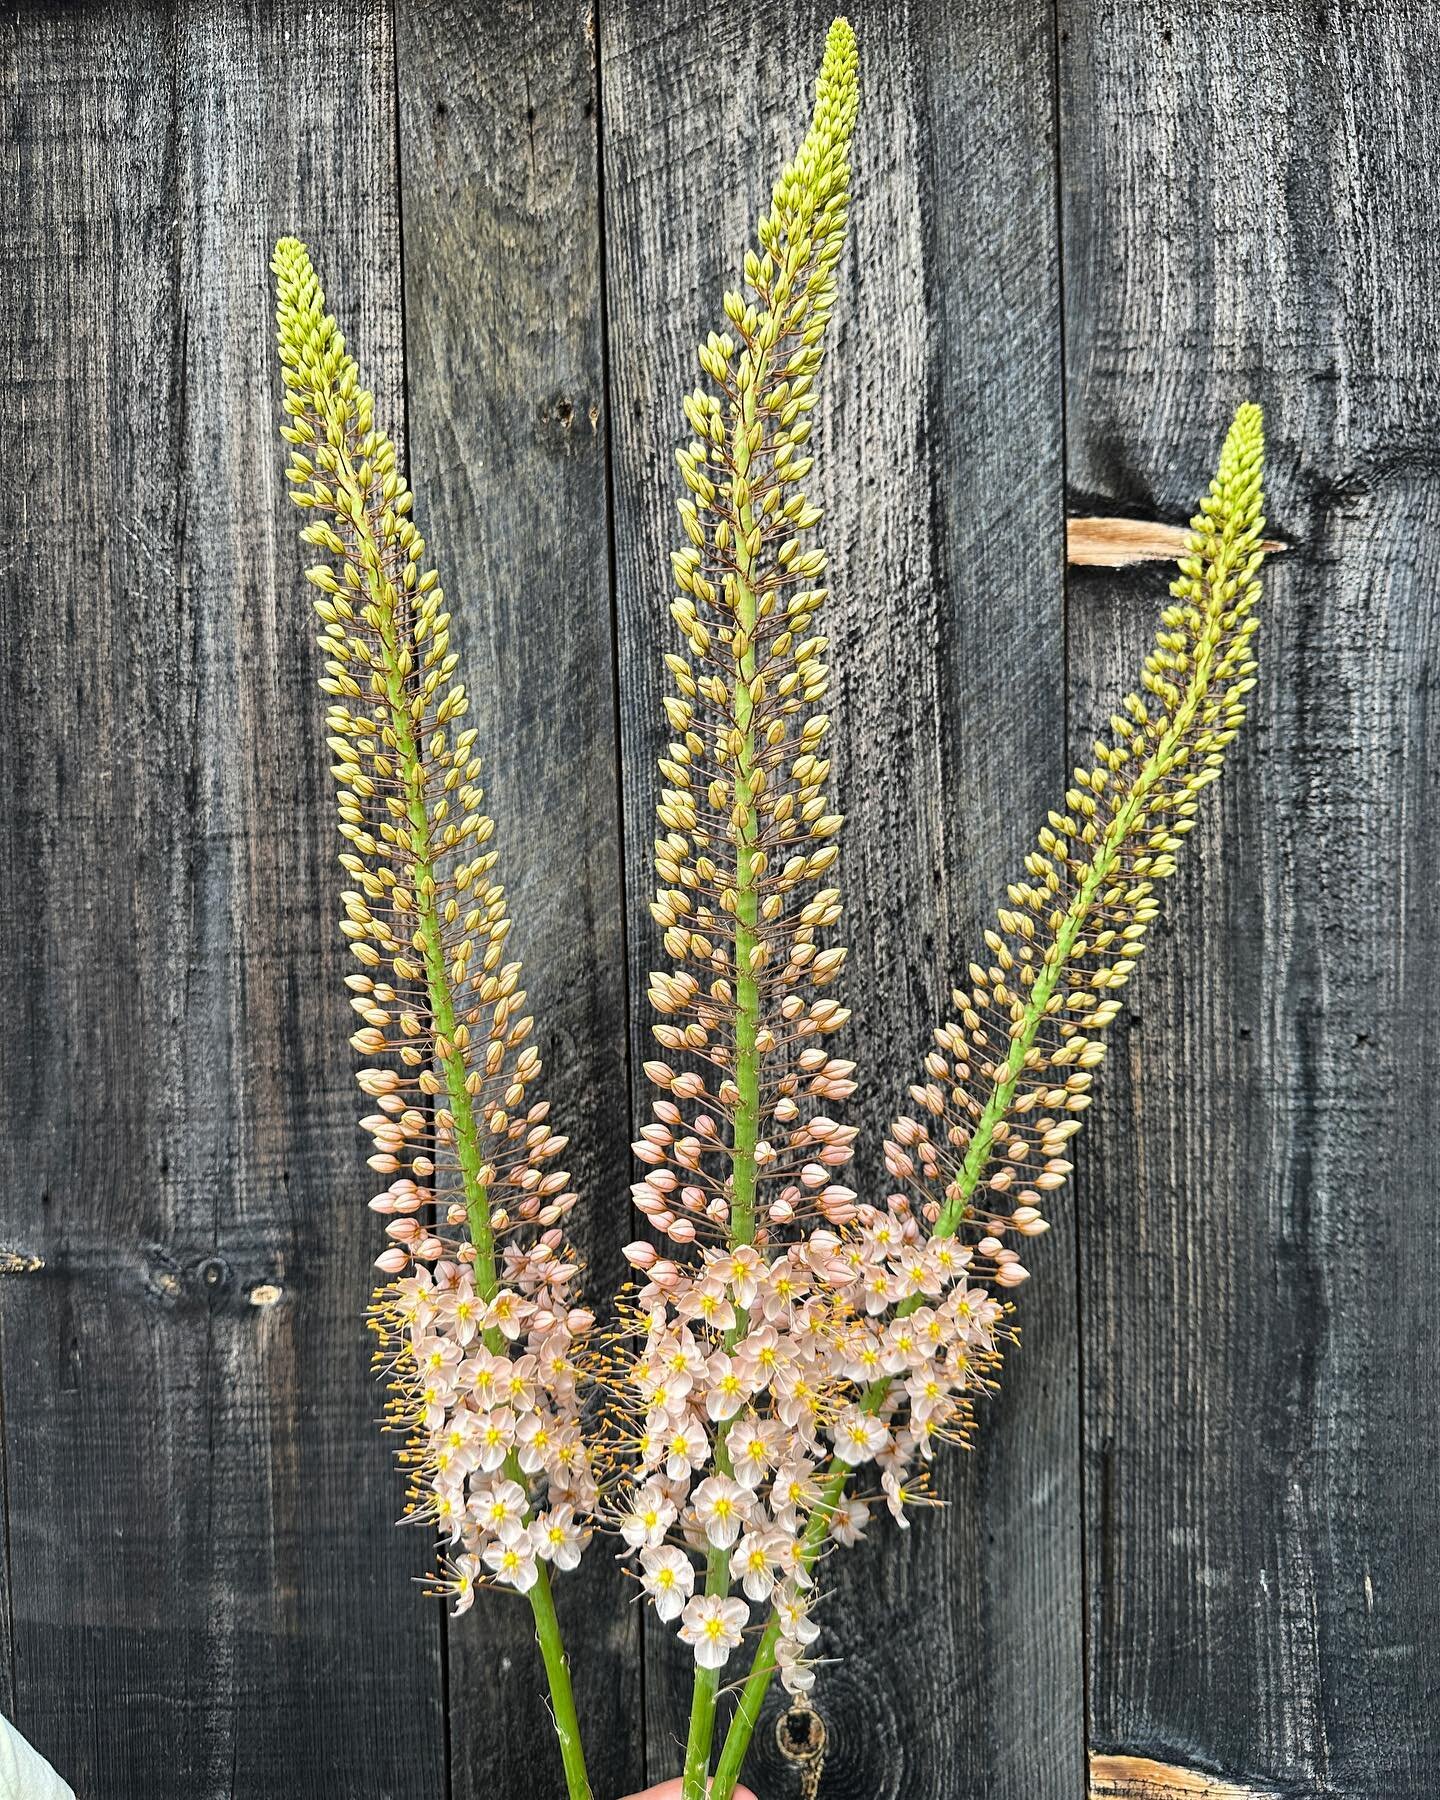 TODAY! Come get these Foxtail Lilies this week only @litchfieldhillsfarmfreshmarket - 10a-1p in the Center School Parking Lot in Litchfield.